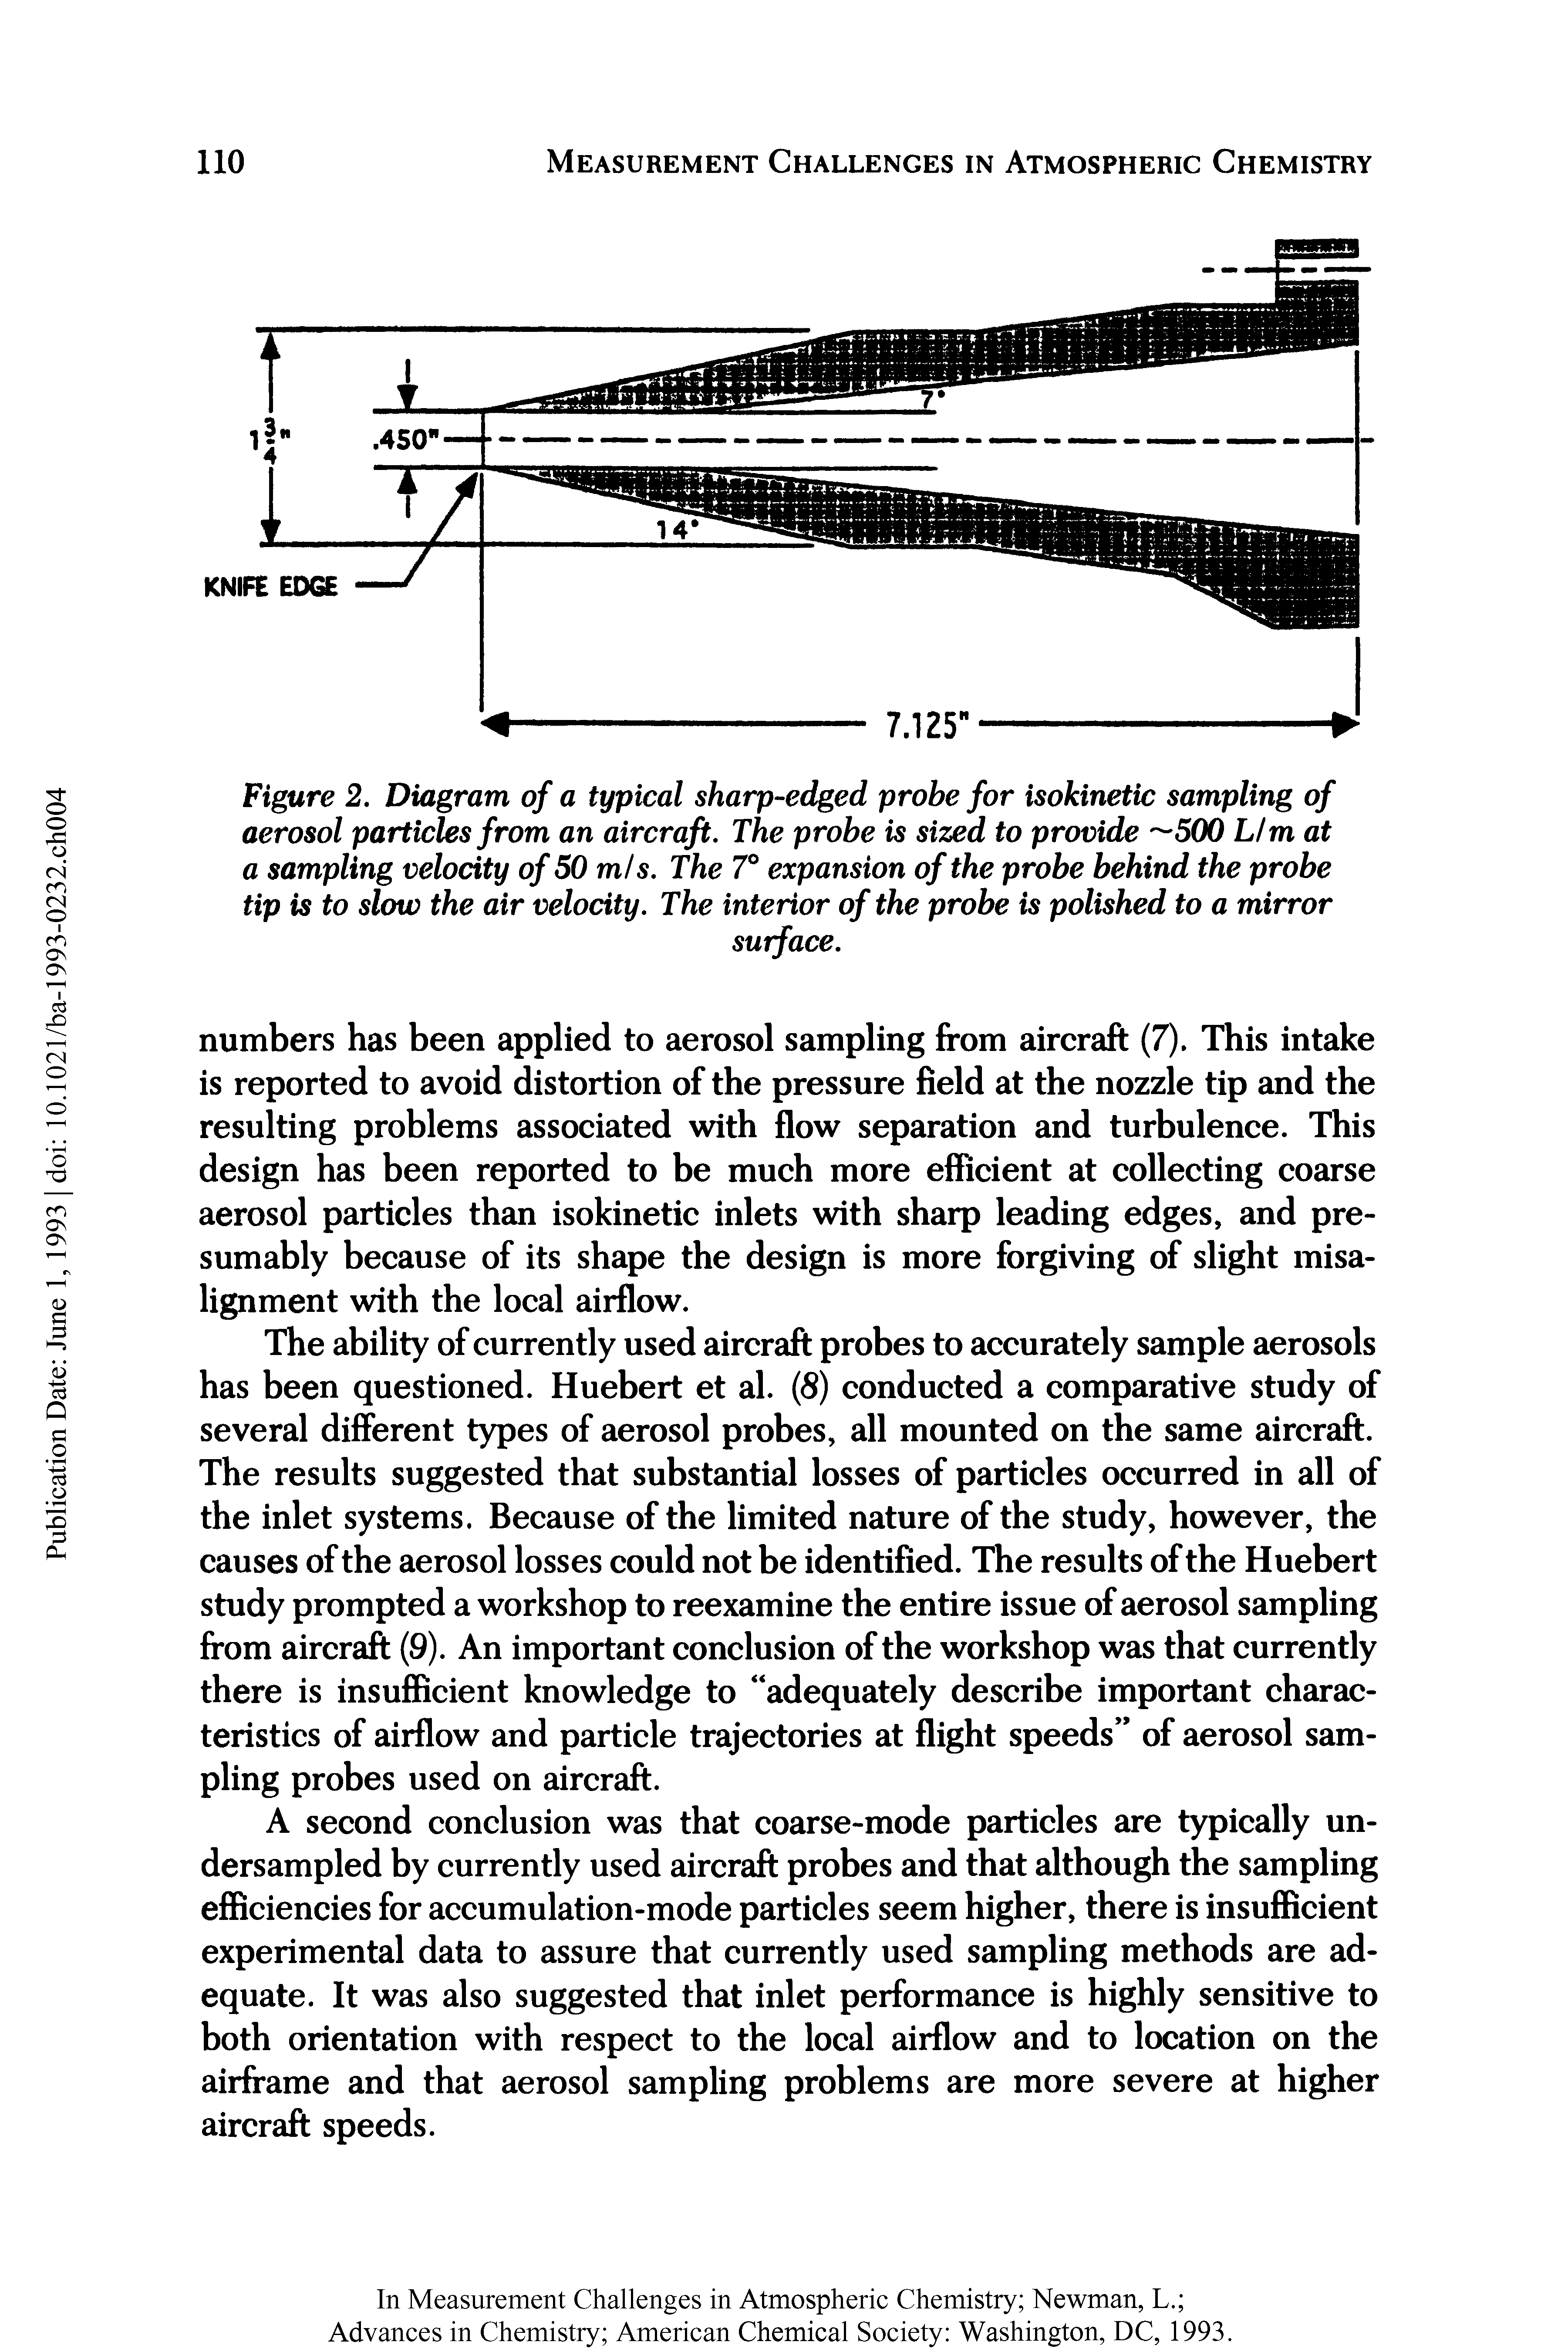 Figure 2. Diagram of a typical sharp-edged probe for isokinetic sampling of aerosol particles from an aircraft. The probe is sized to provide 500 L/m at a sampling velocity of 50 mis. The 7° expansion of the probe behind the probe tip is to slow the air velocity. The interior of the probe is polished to a mirror...